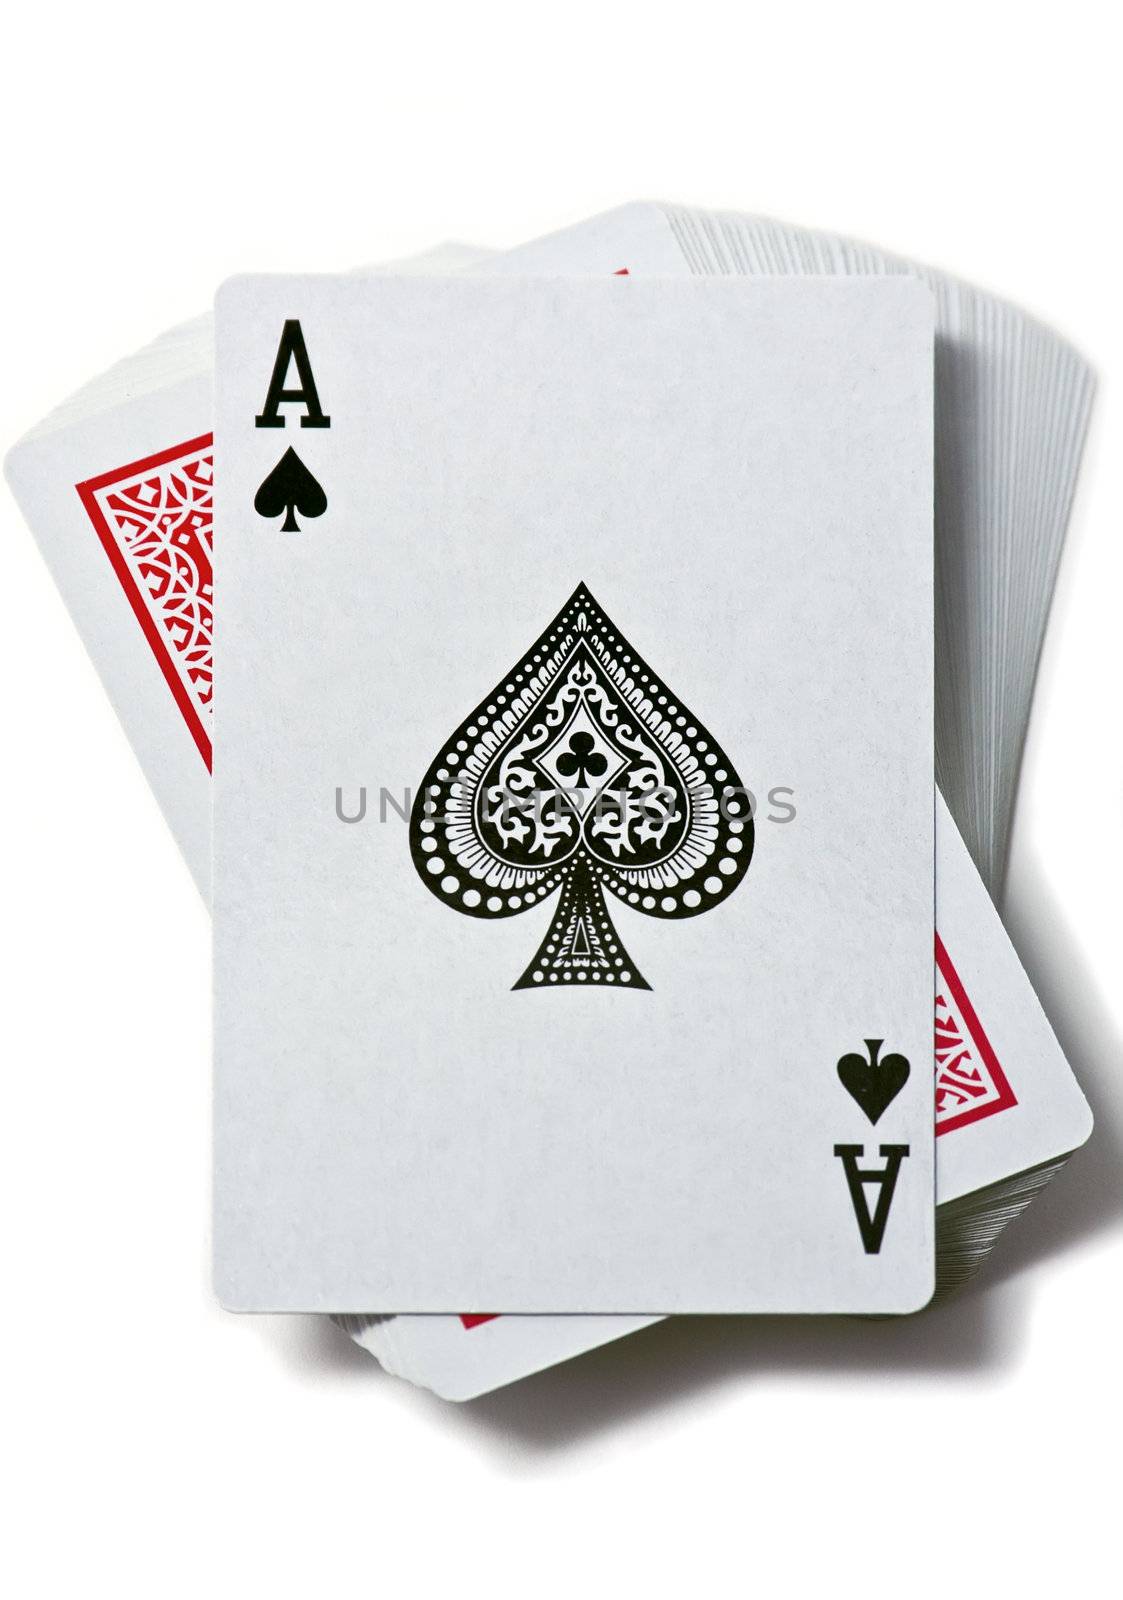 ace of spades is on a deck of cards